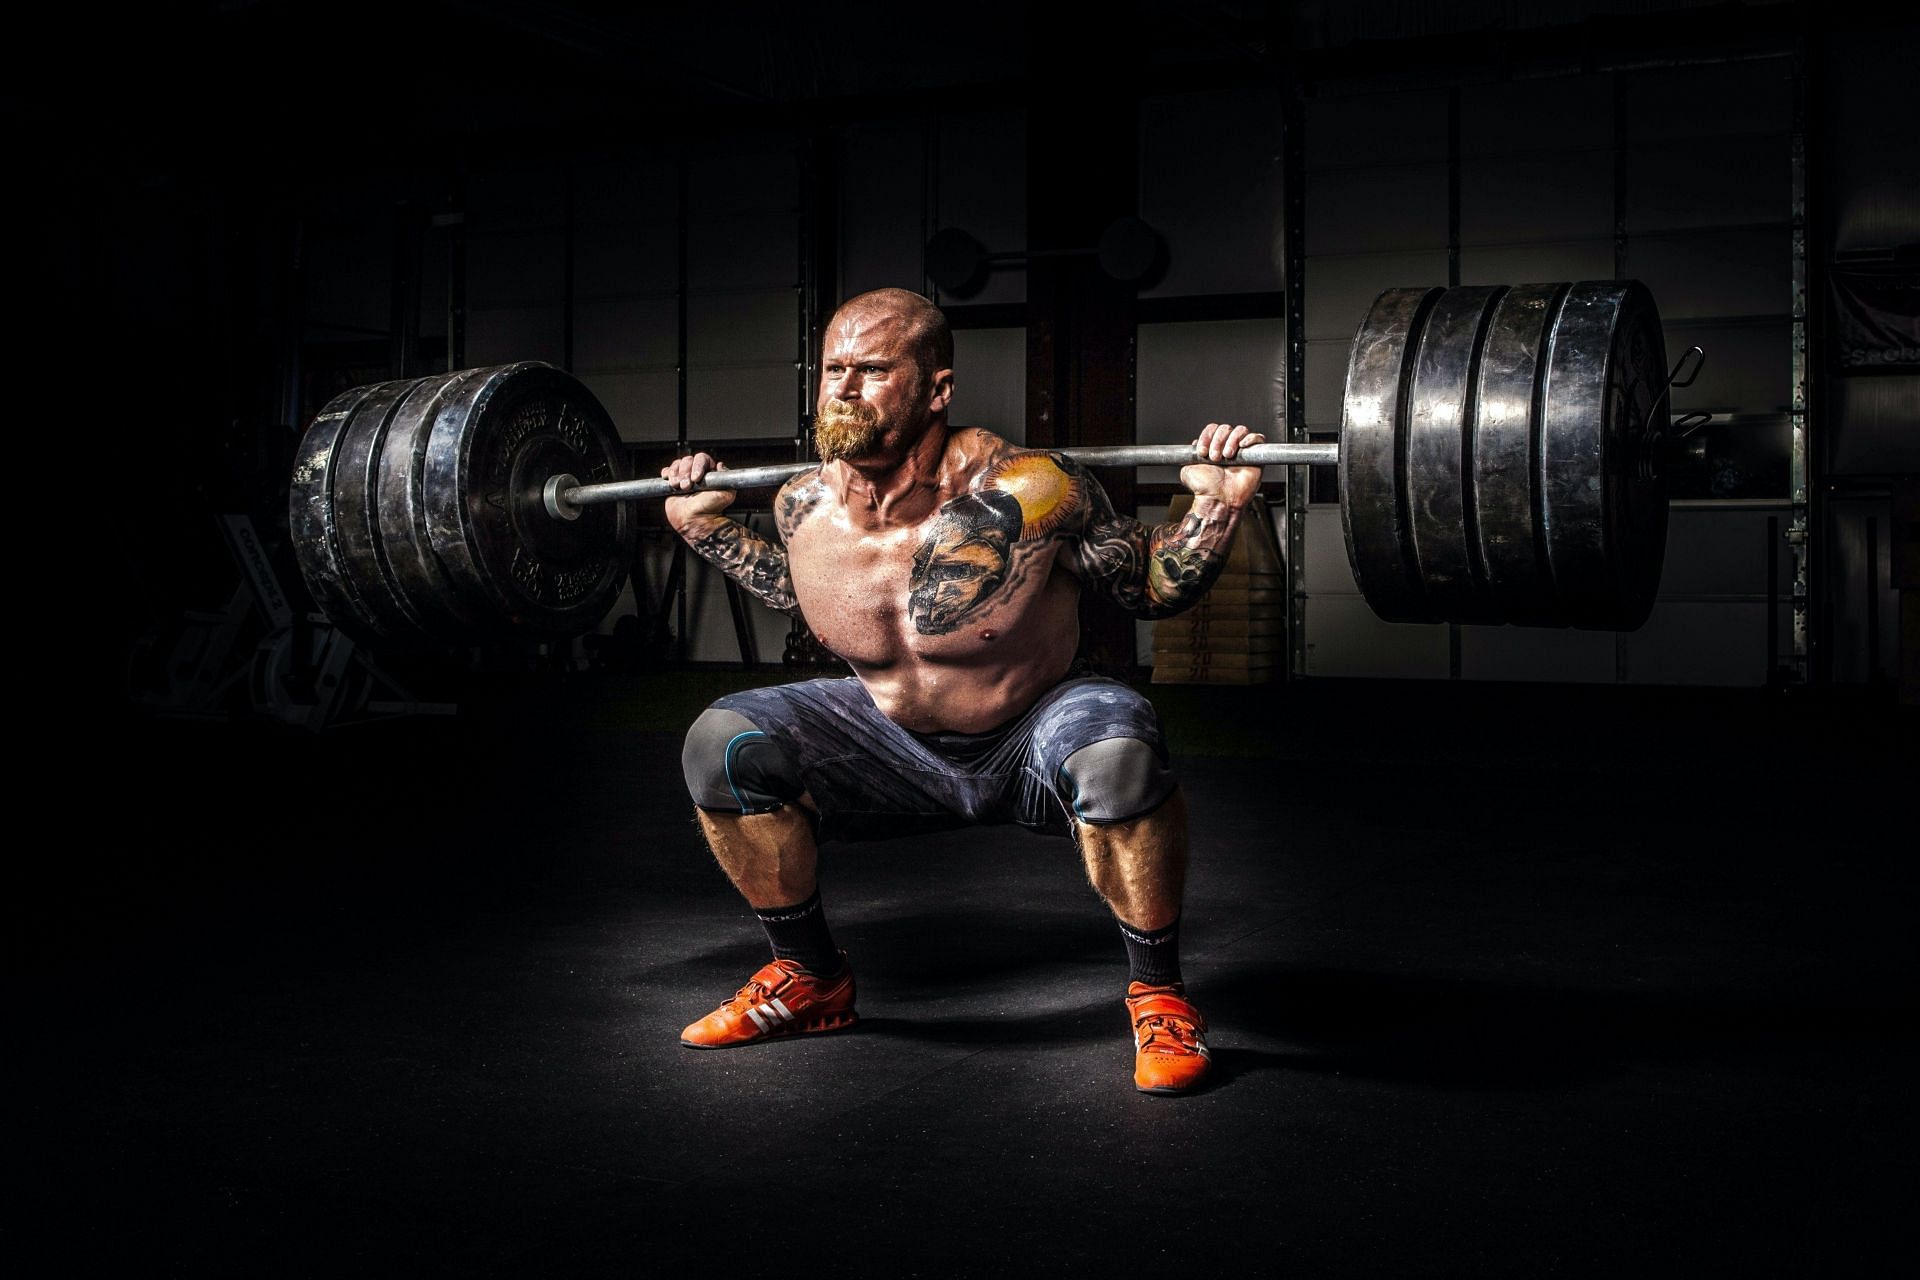 The barbell squat is one of the best leg workouts for men. (Image via Pexels/Binyamin Mellish)